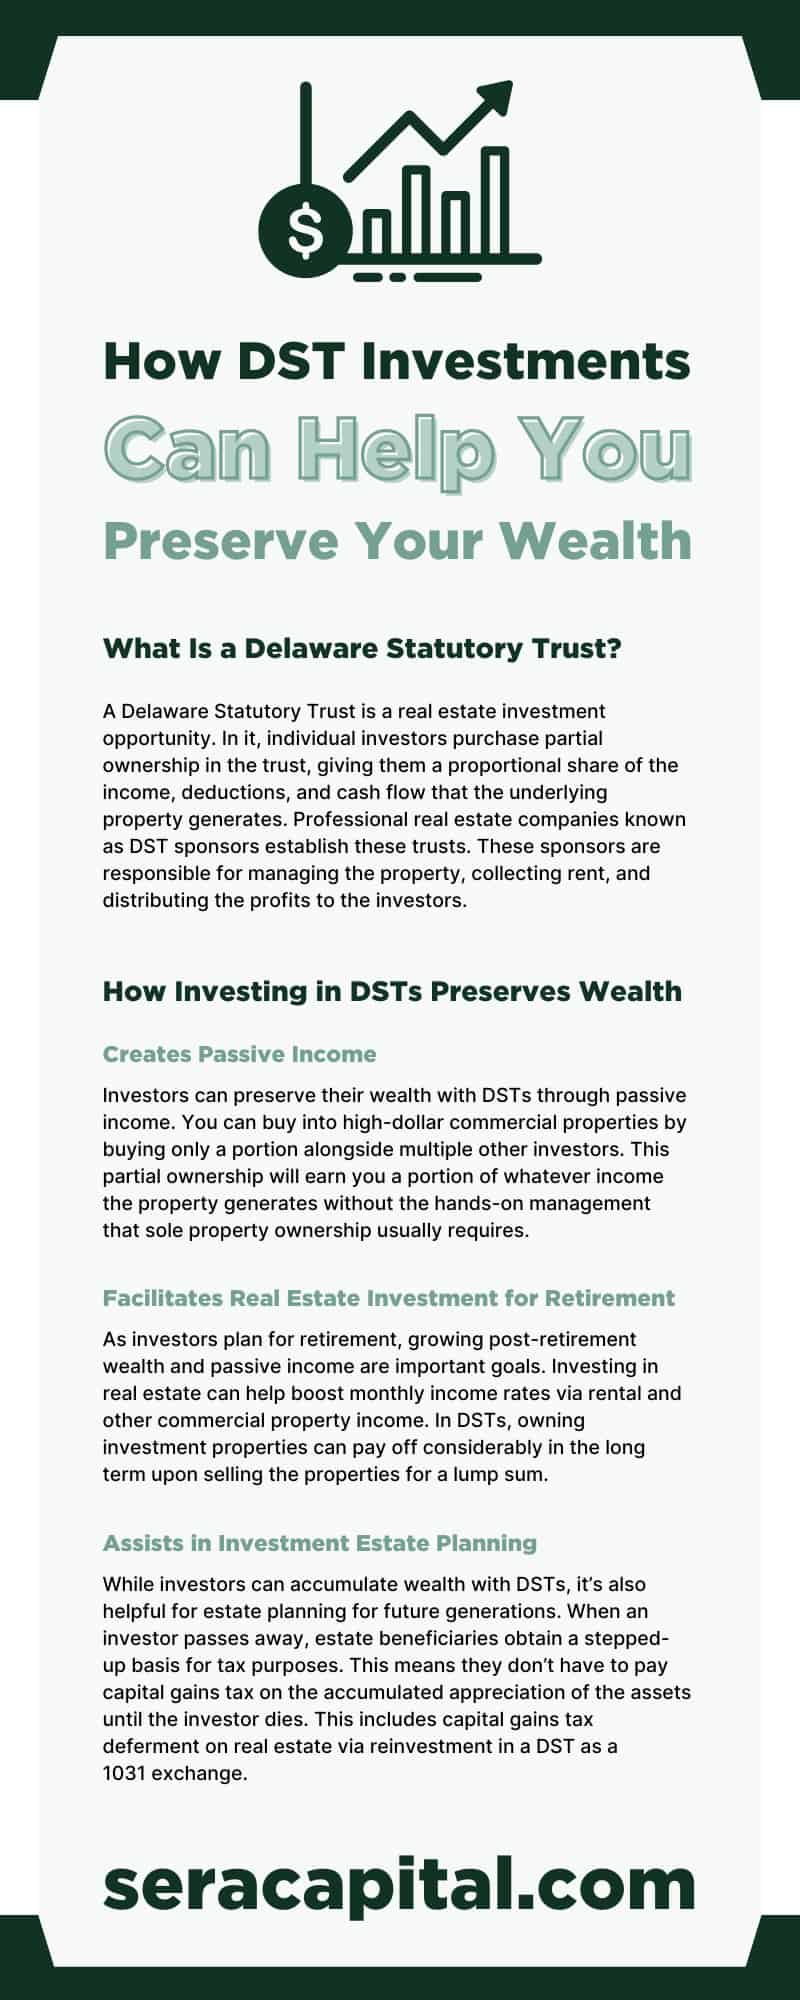 How DST Investments Can Help You Preserve Your Wealth